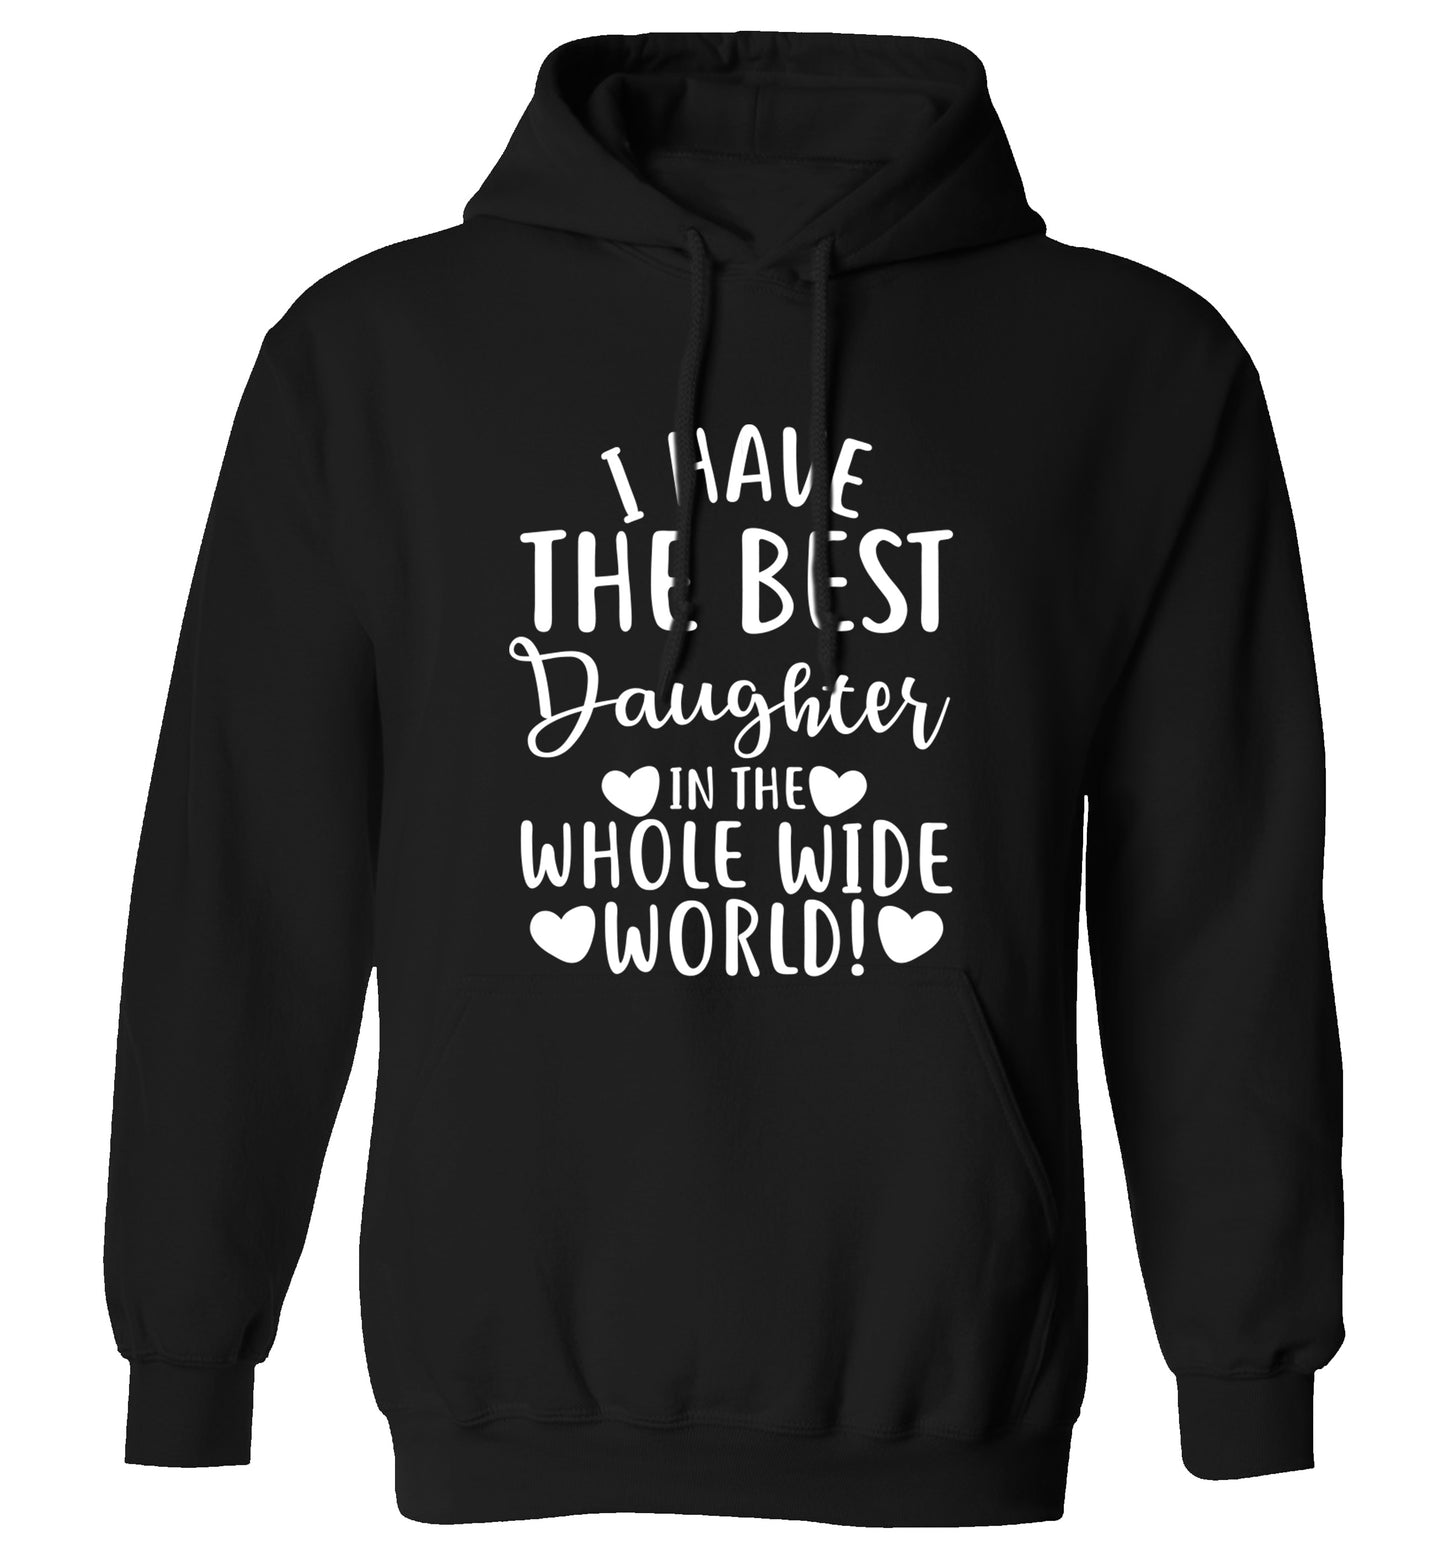 I have the best daughter in the whole wide world! adults unisex black hoodie 2XL